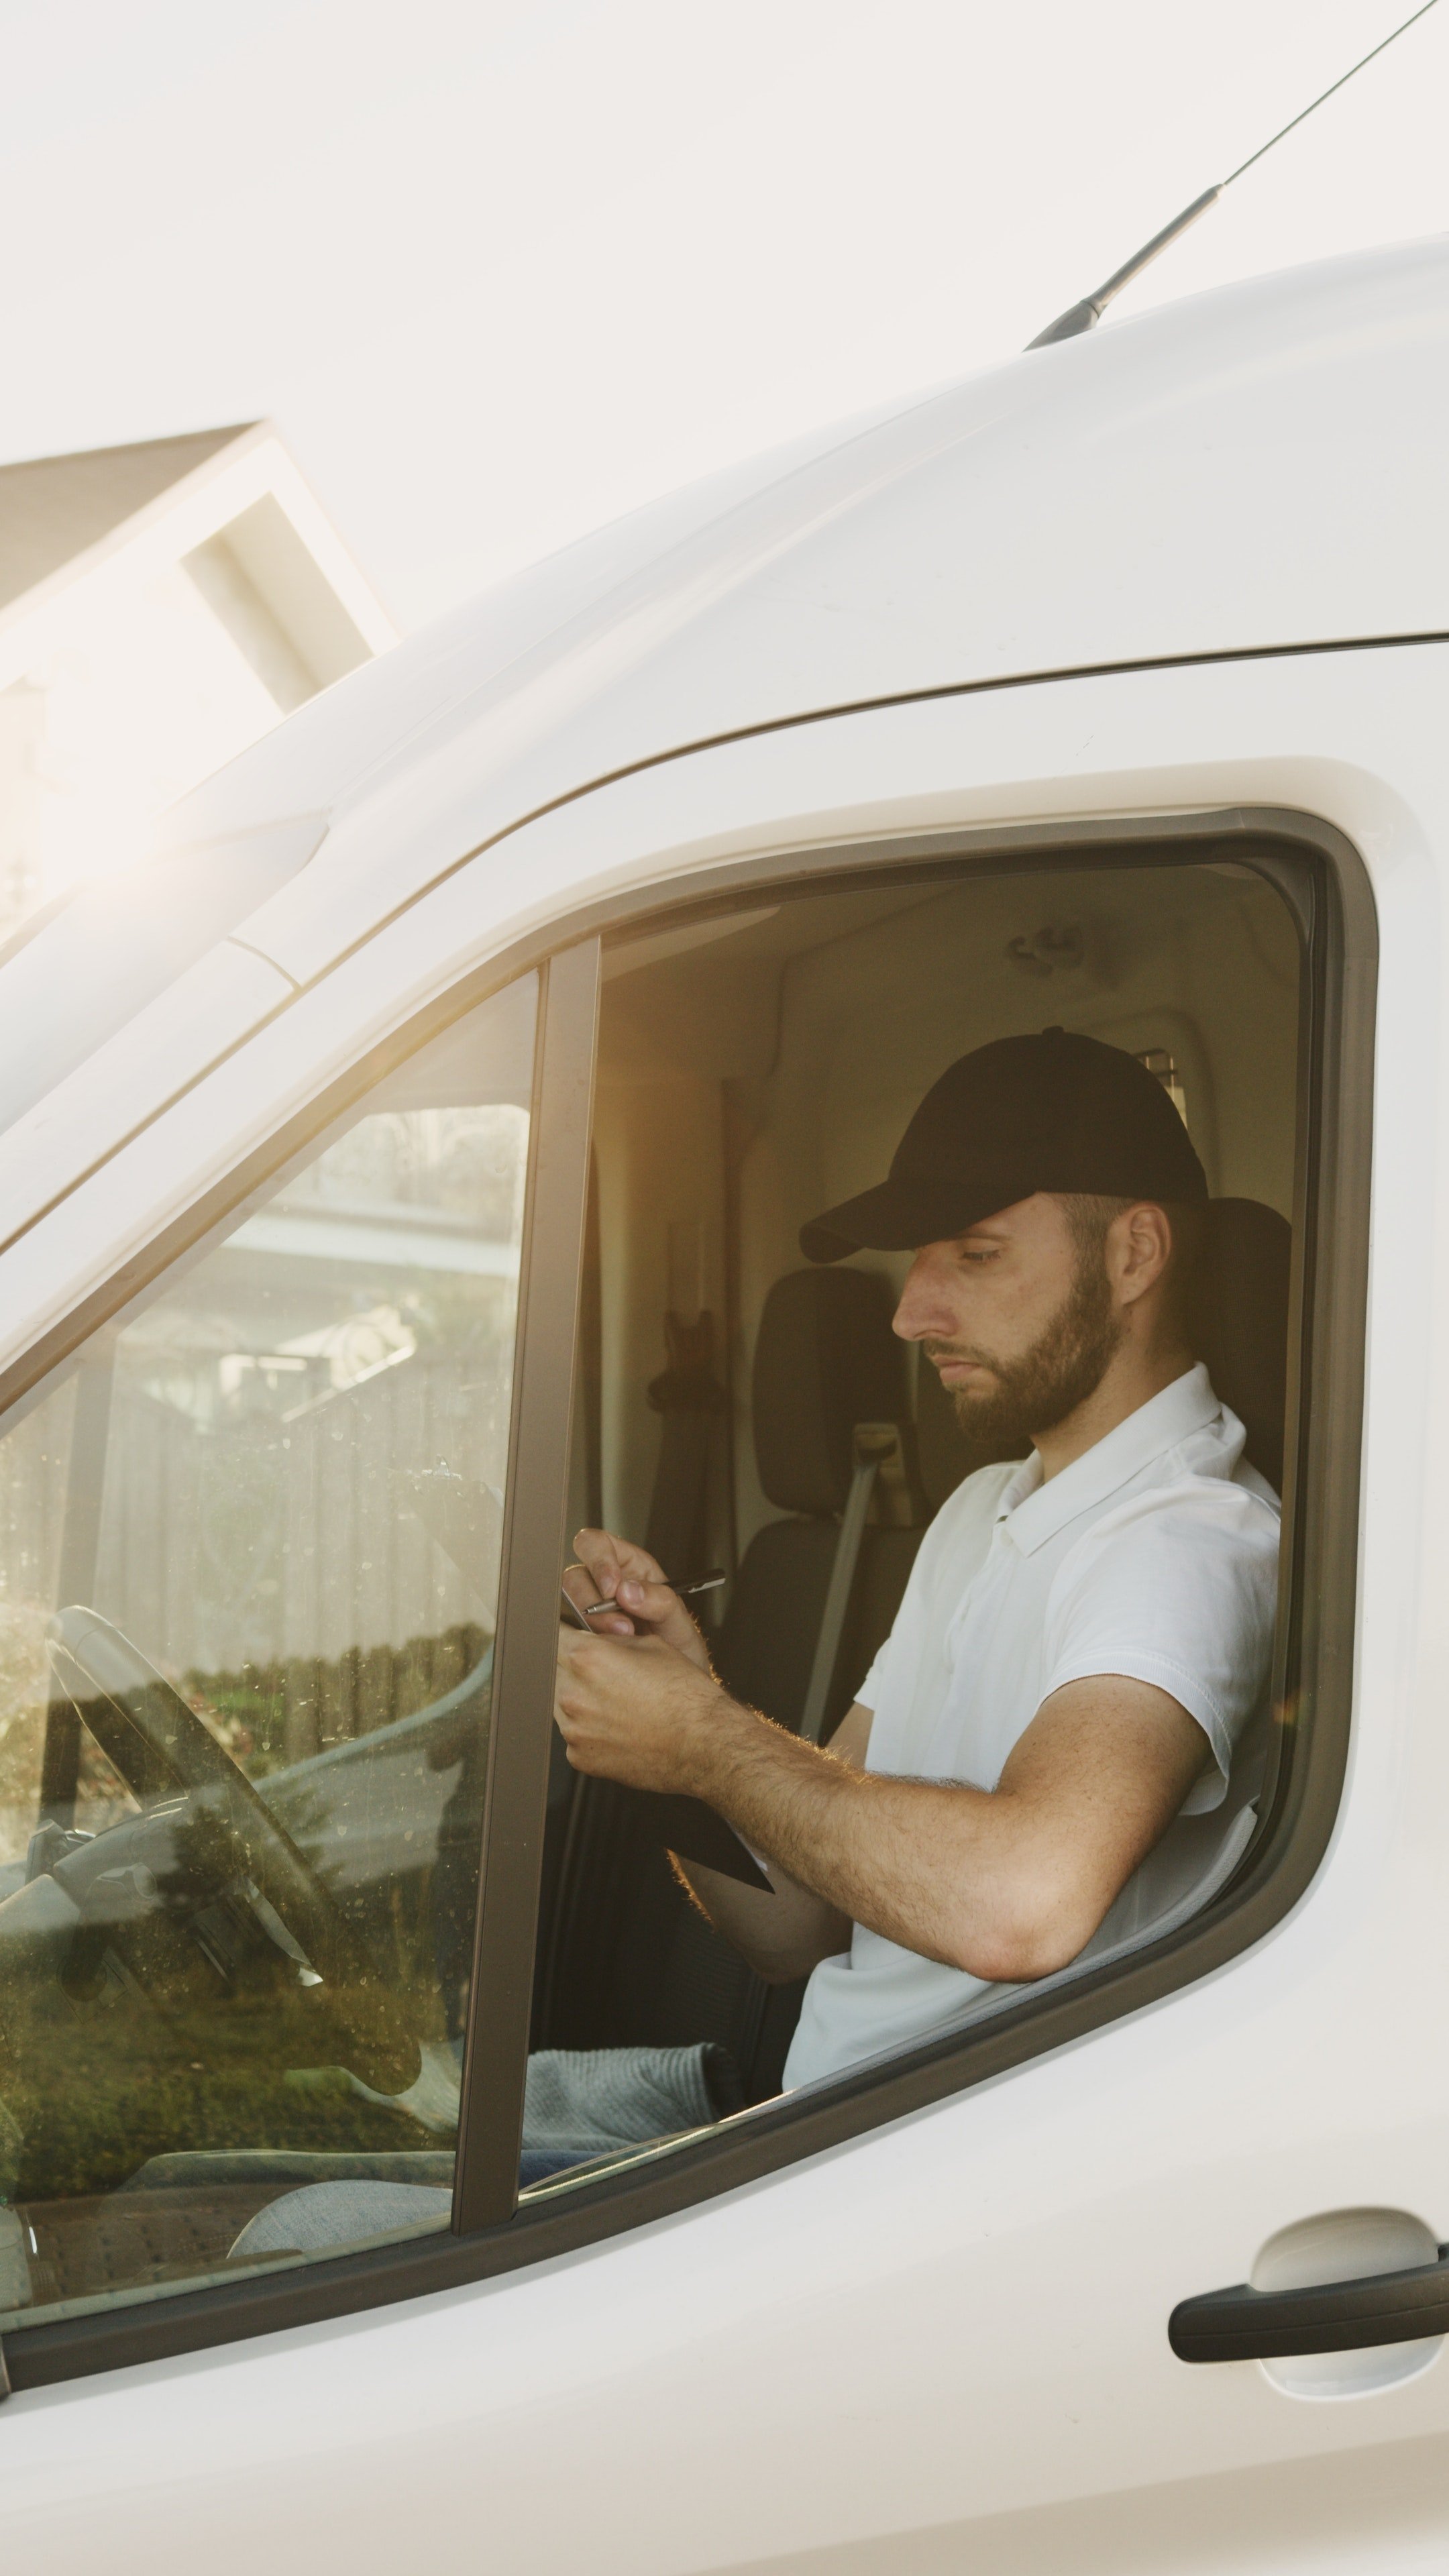 On his route, Patrick thought about solutions to his tardiness. | Source: Pexels